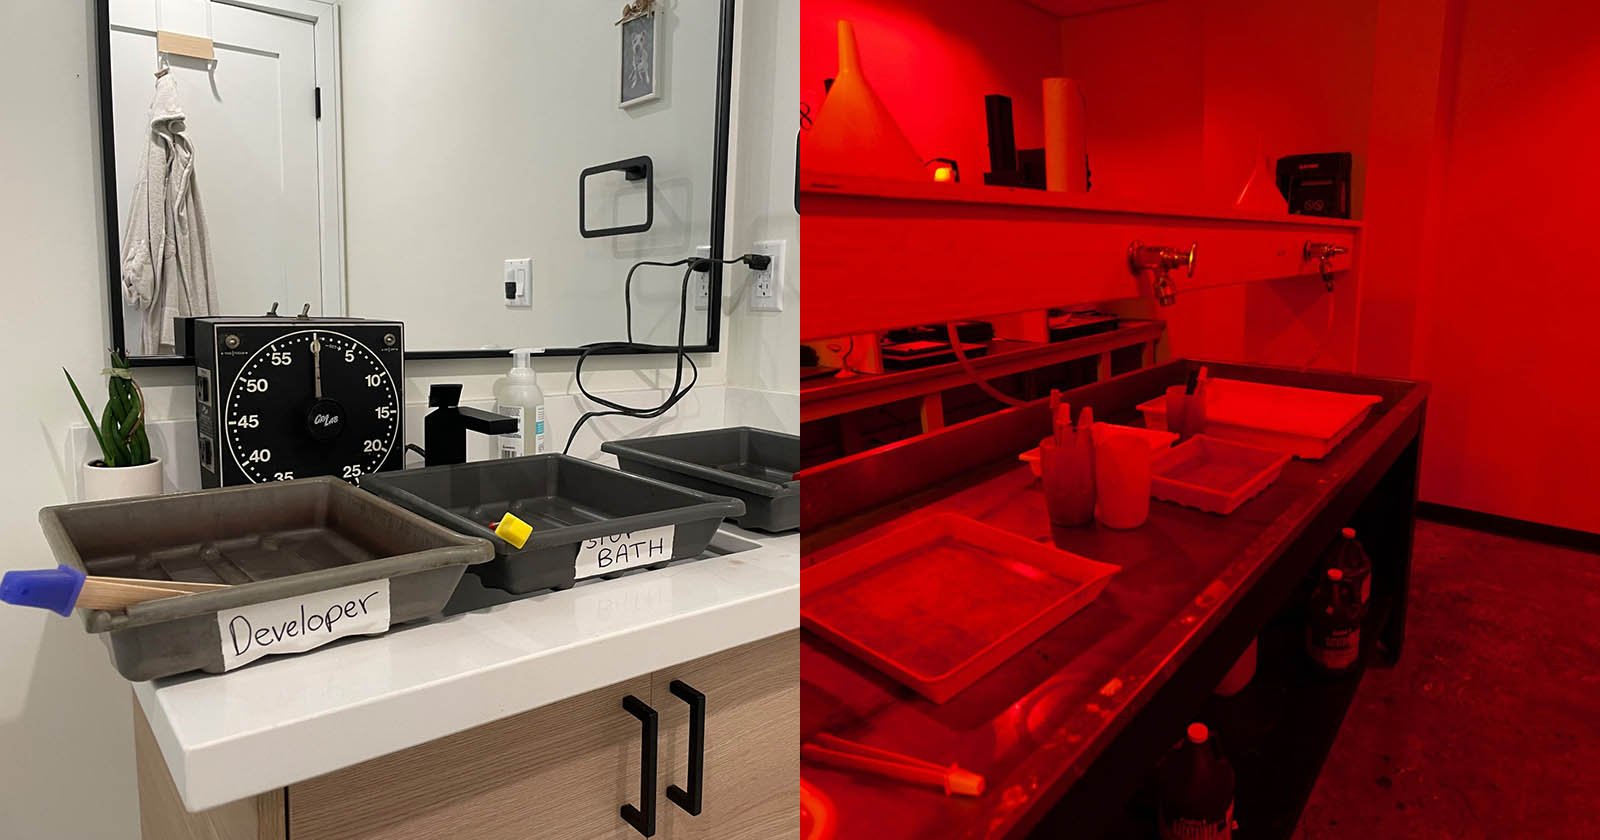 Split image of two darkroom setups. left: a modern, tidy darkroom with labeled tubs for developing film. right: a dimly lit, red-illuminated traditional darkroom with trays and chemical bottles.